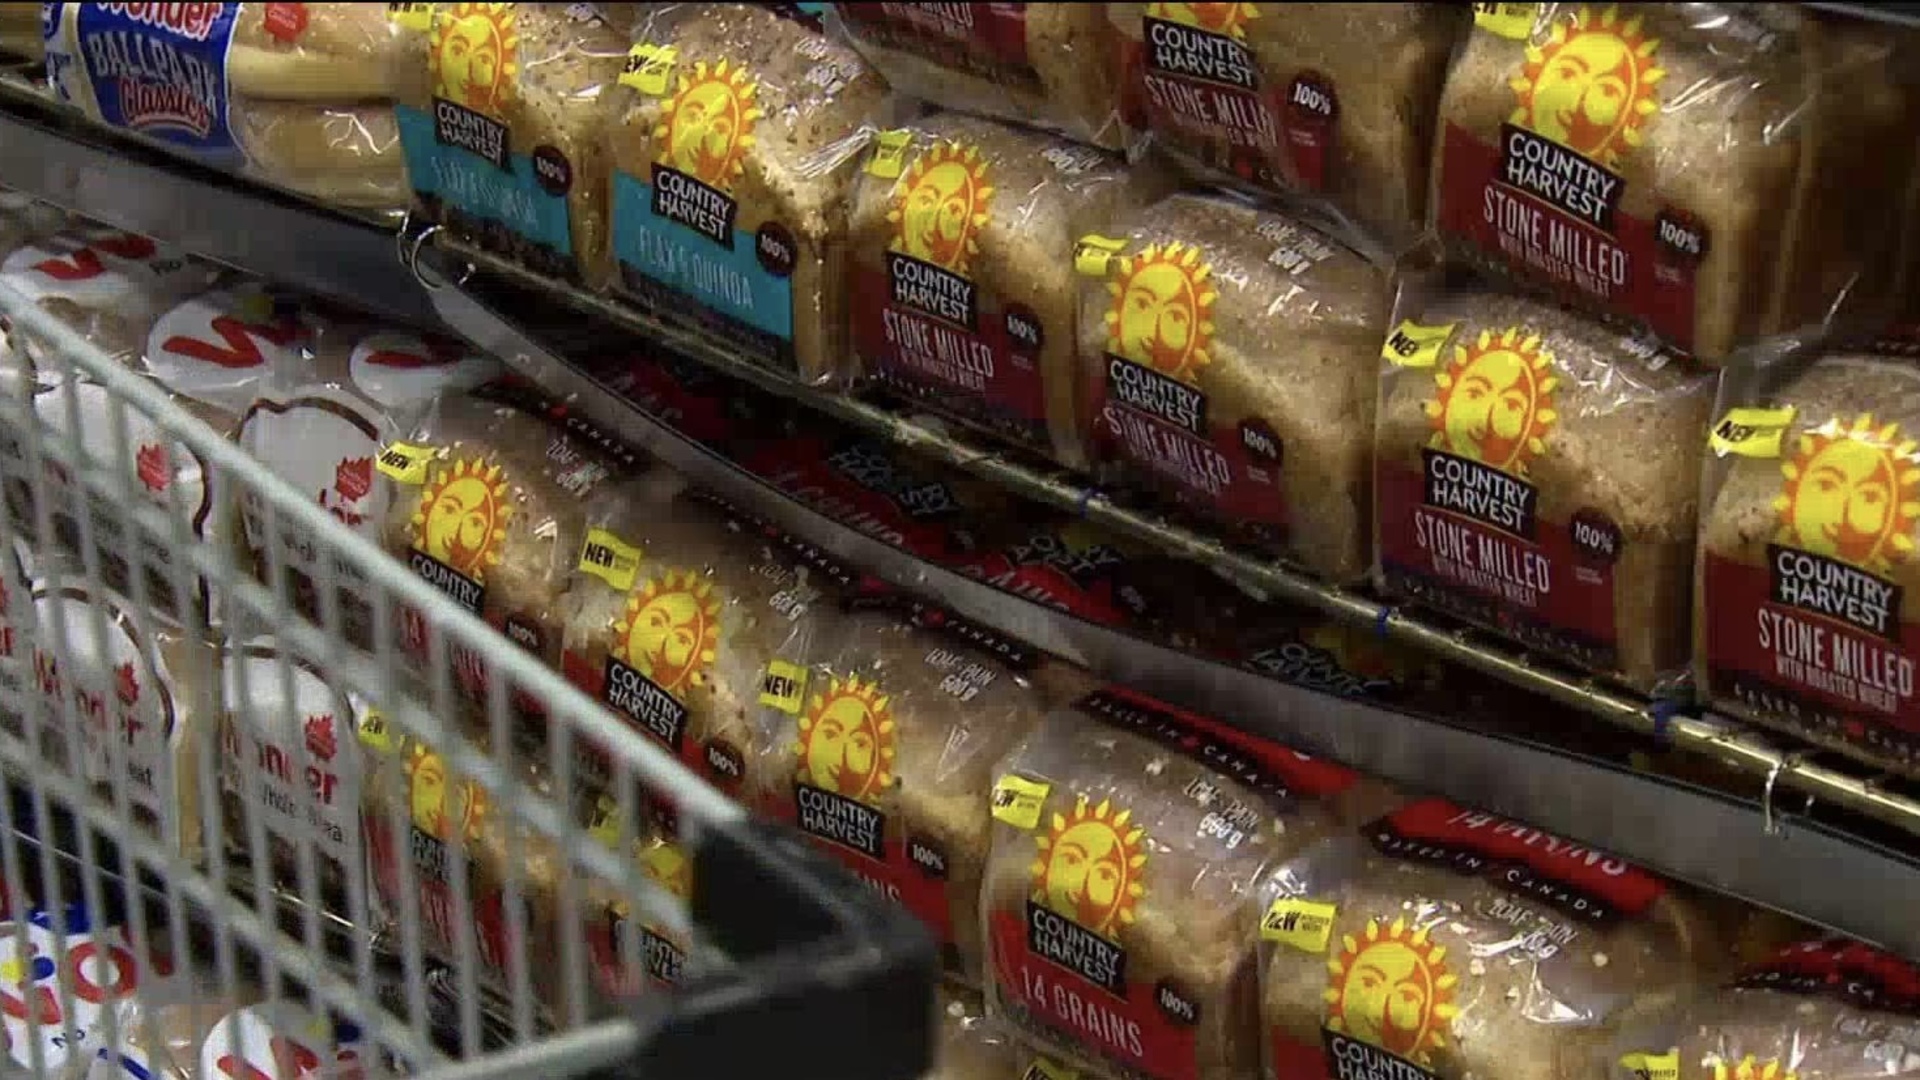 Loblaw, George Weston to settle class action over bread price-fixing for $500 million